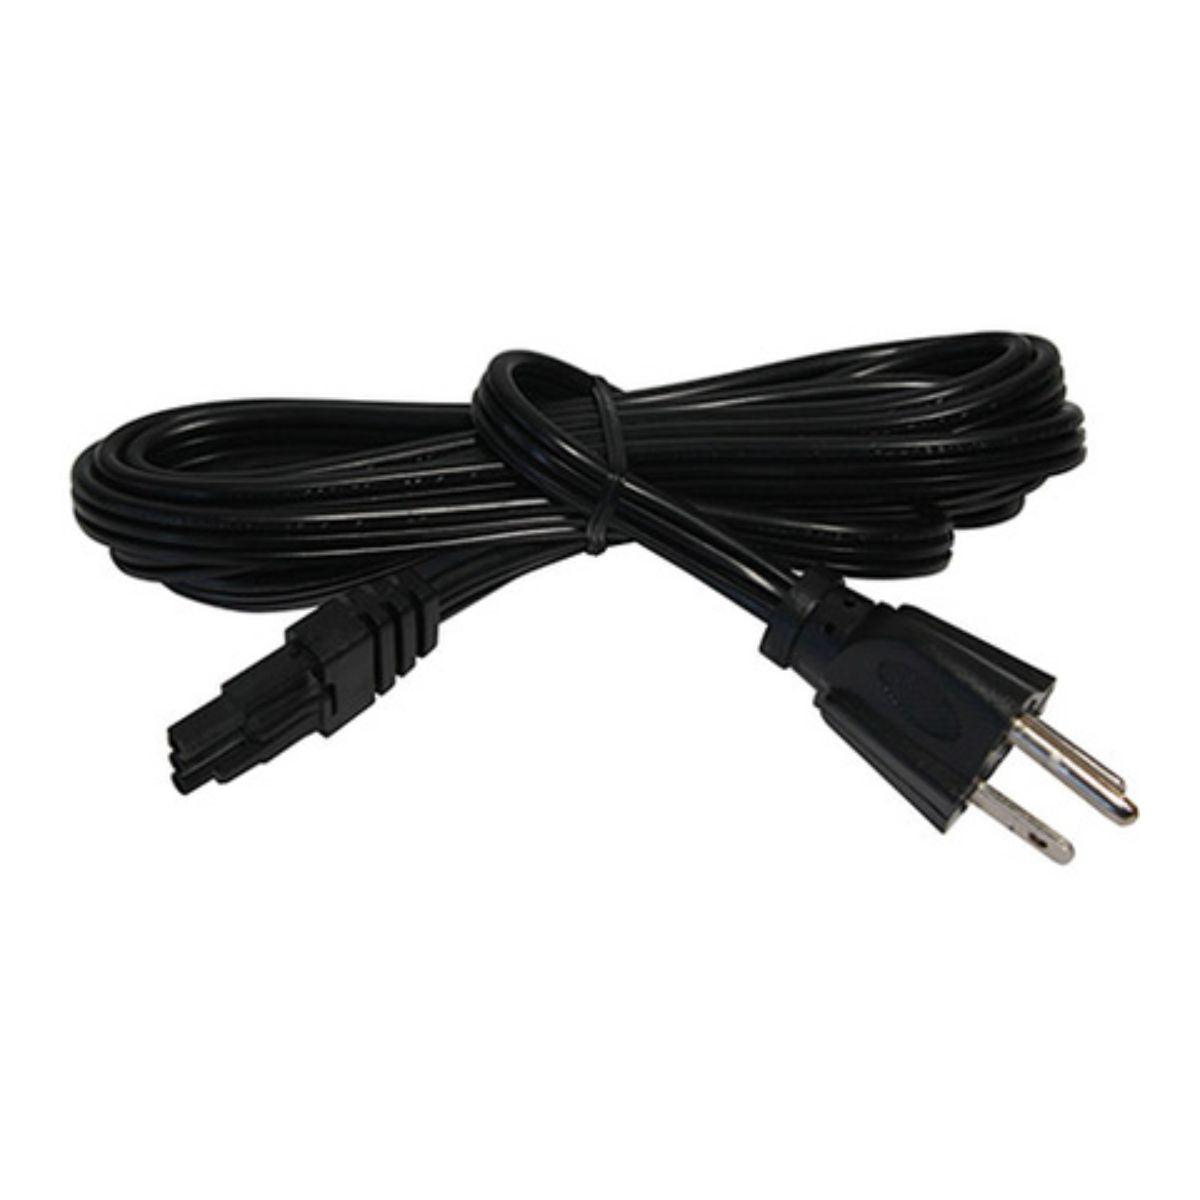 6ft Grounded Plug-in Power Cord For Undercabinet Lights, Black Finish